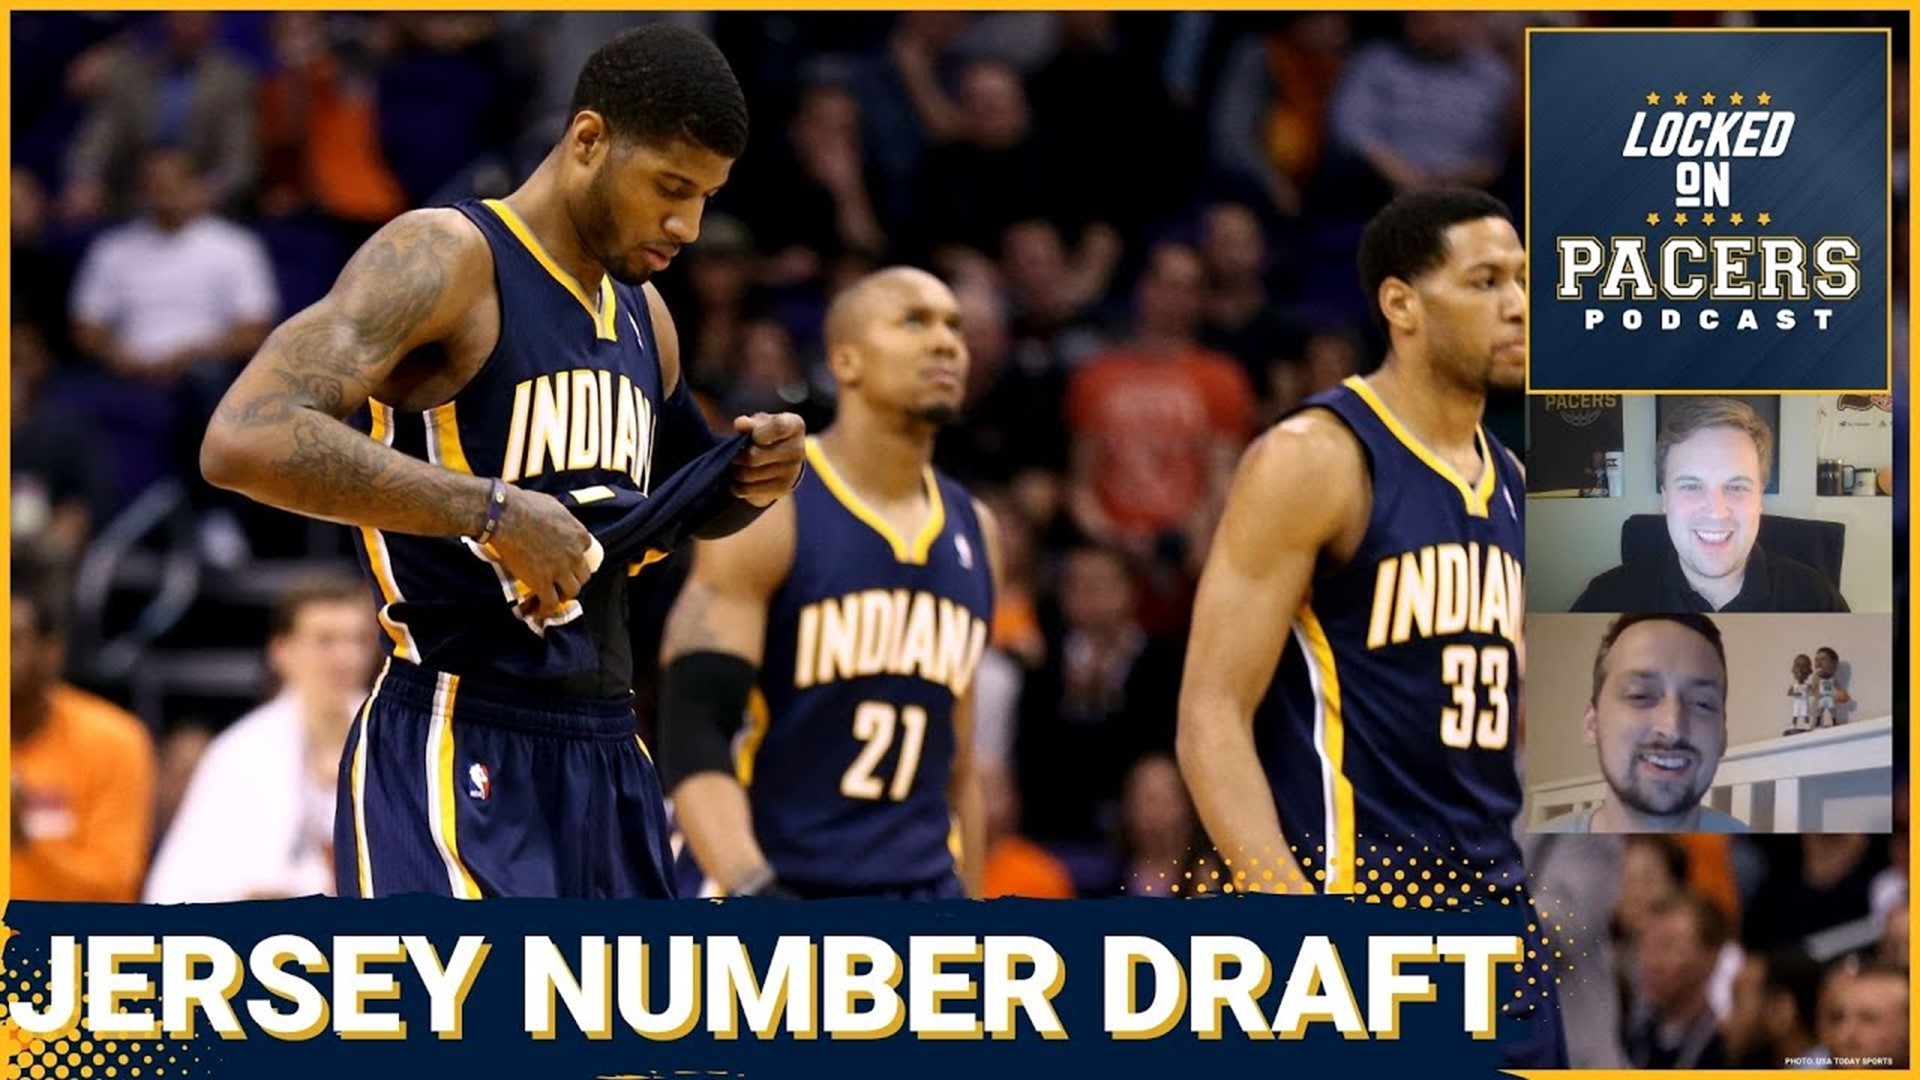 Drafting the best Indiana Pacers team possible based on jersey numbers